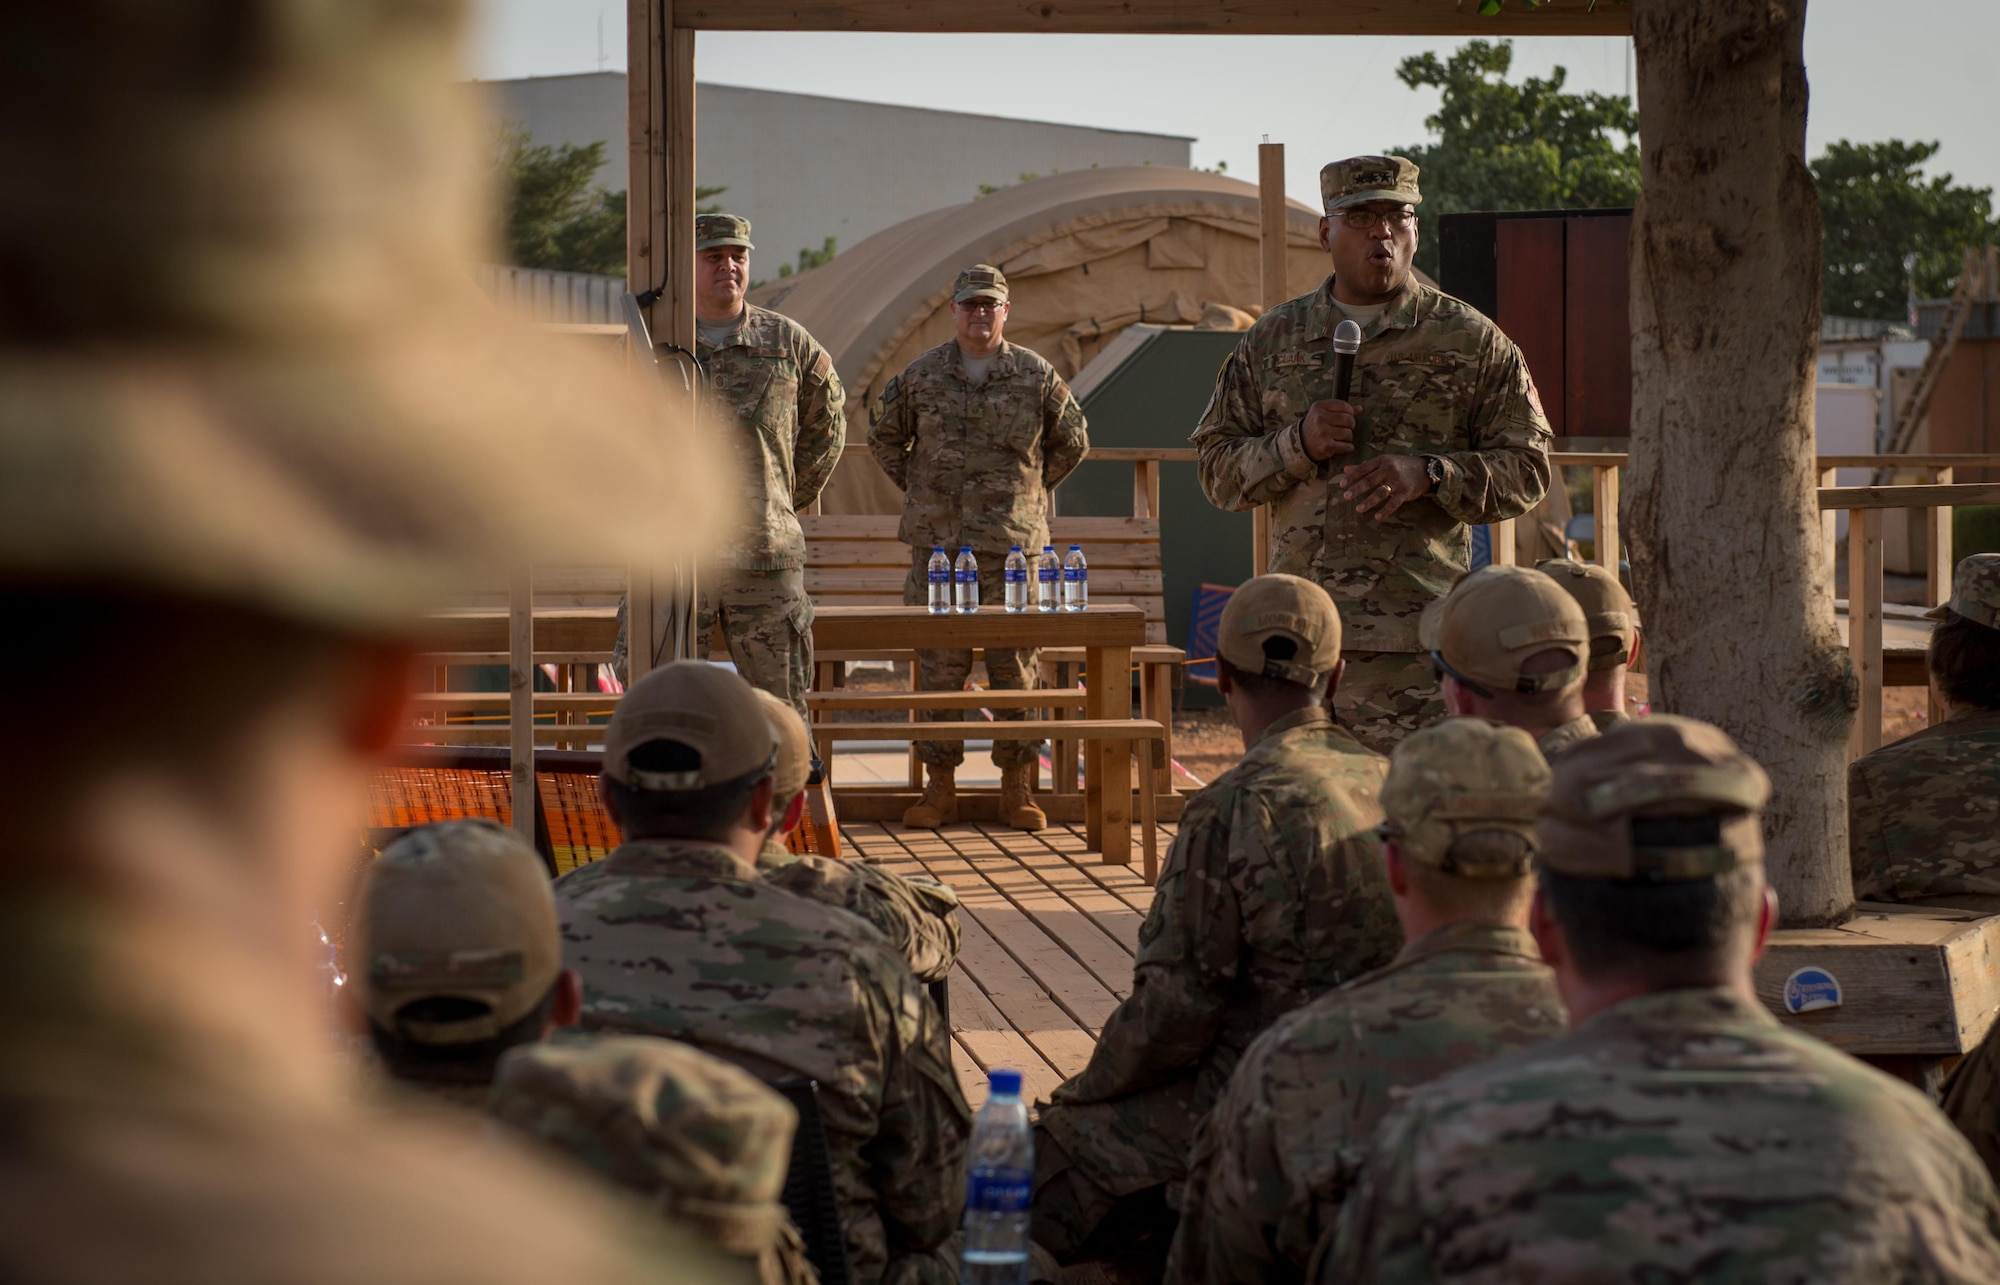 Lt. Gen. Richard Clark, 17th Expeditionary Air Force commander, speaks to Airmen from 768th Expeditionary Air Base Squadron during an all call at Air Base 101, Niamey, Niger, Nov. 23, 2016. During a three day trip, Clark visited Airmen in Europe and Africa who support the Air Force's intelligence, surveillance and reconnaissance mission. This was Clark's first visit to NAS Sigonella, Niamey and Agadez as 17th Expeditionary Air Force commander. (U.S. Air Force photo by Tech. Sgt. Ryan Crane)